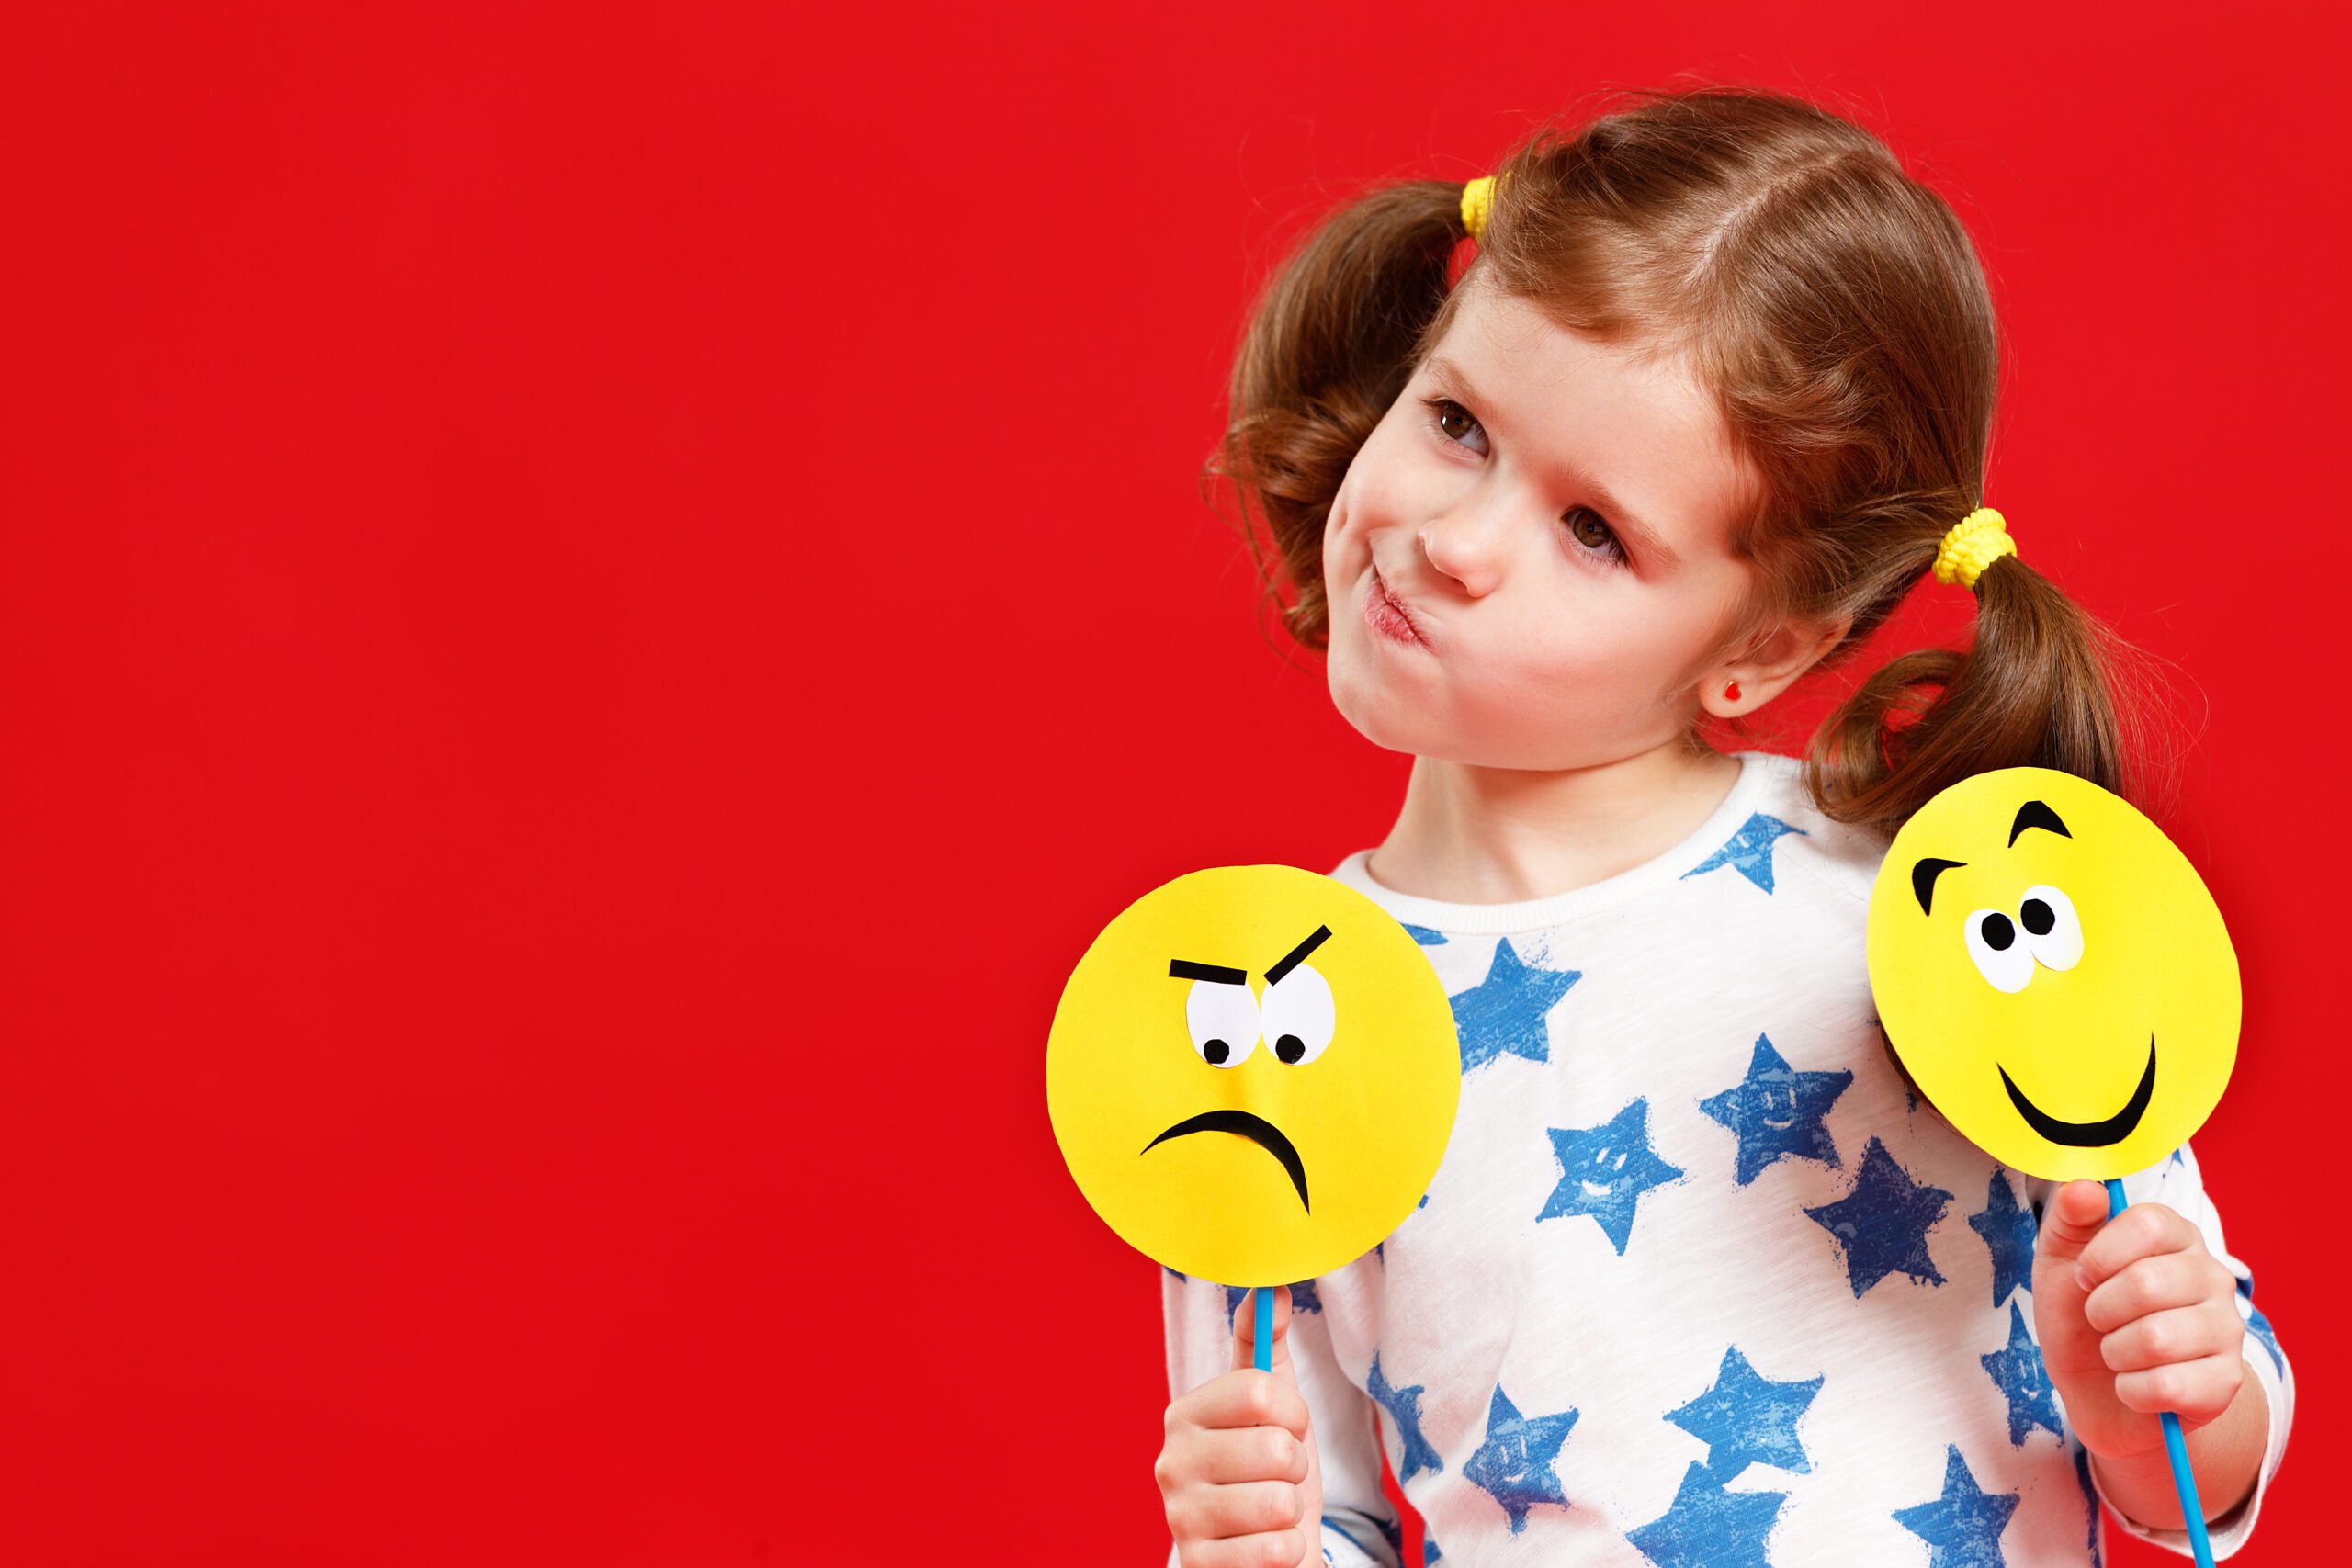 5 Simple Ways for Helping Kids with Their Emotions